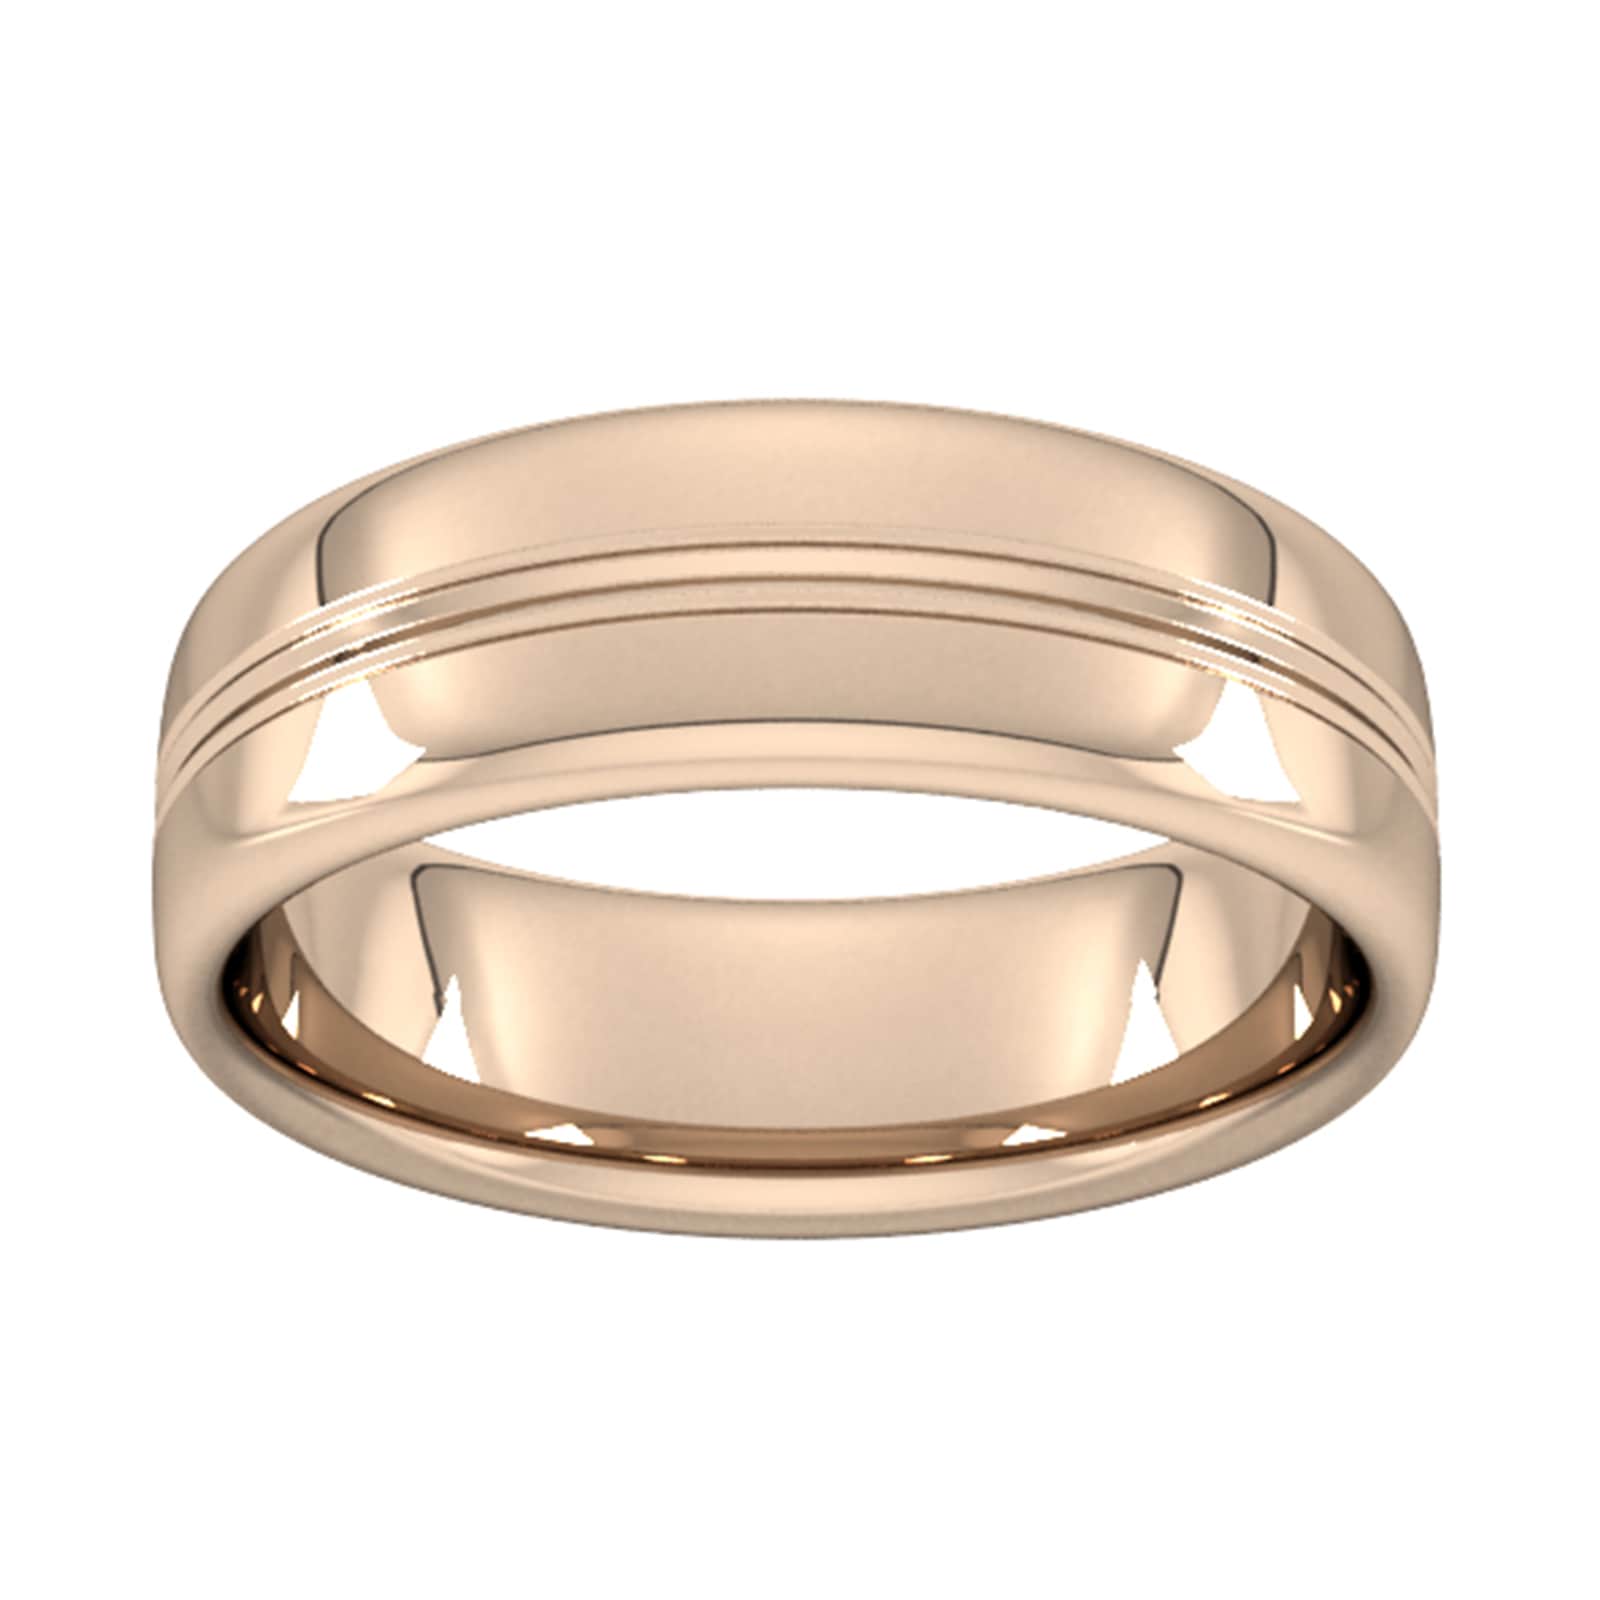 7mm Slight Court Heavy Grooved Polished Finish Wedding Ring In 18 Carat Rose Gold - Ring Size N